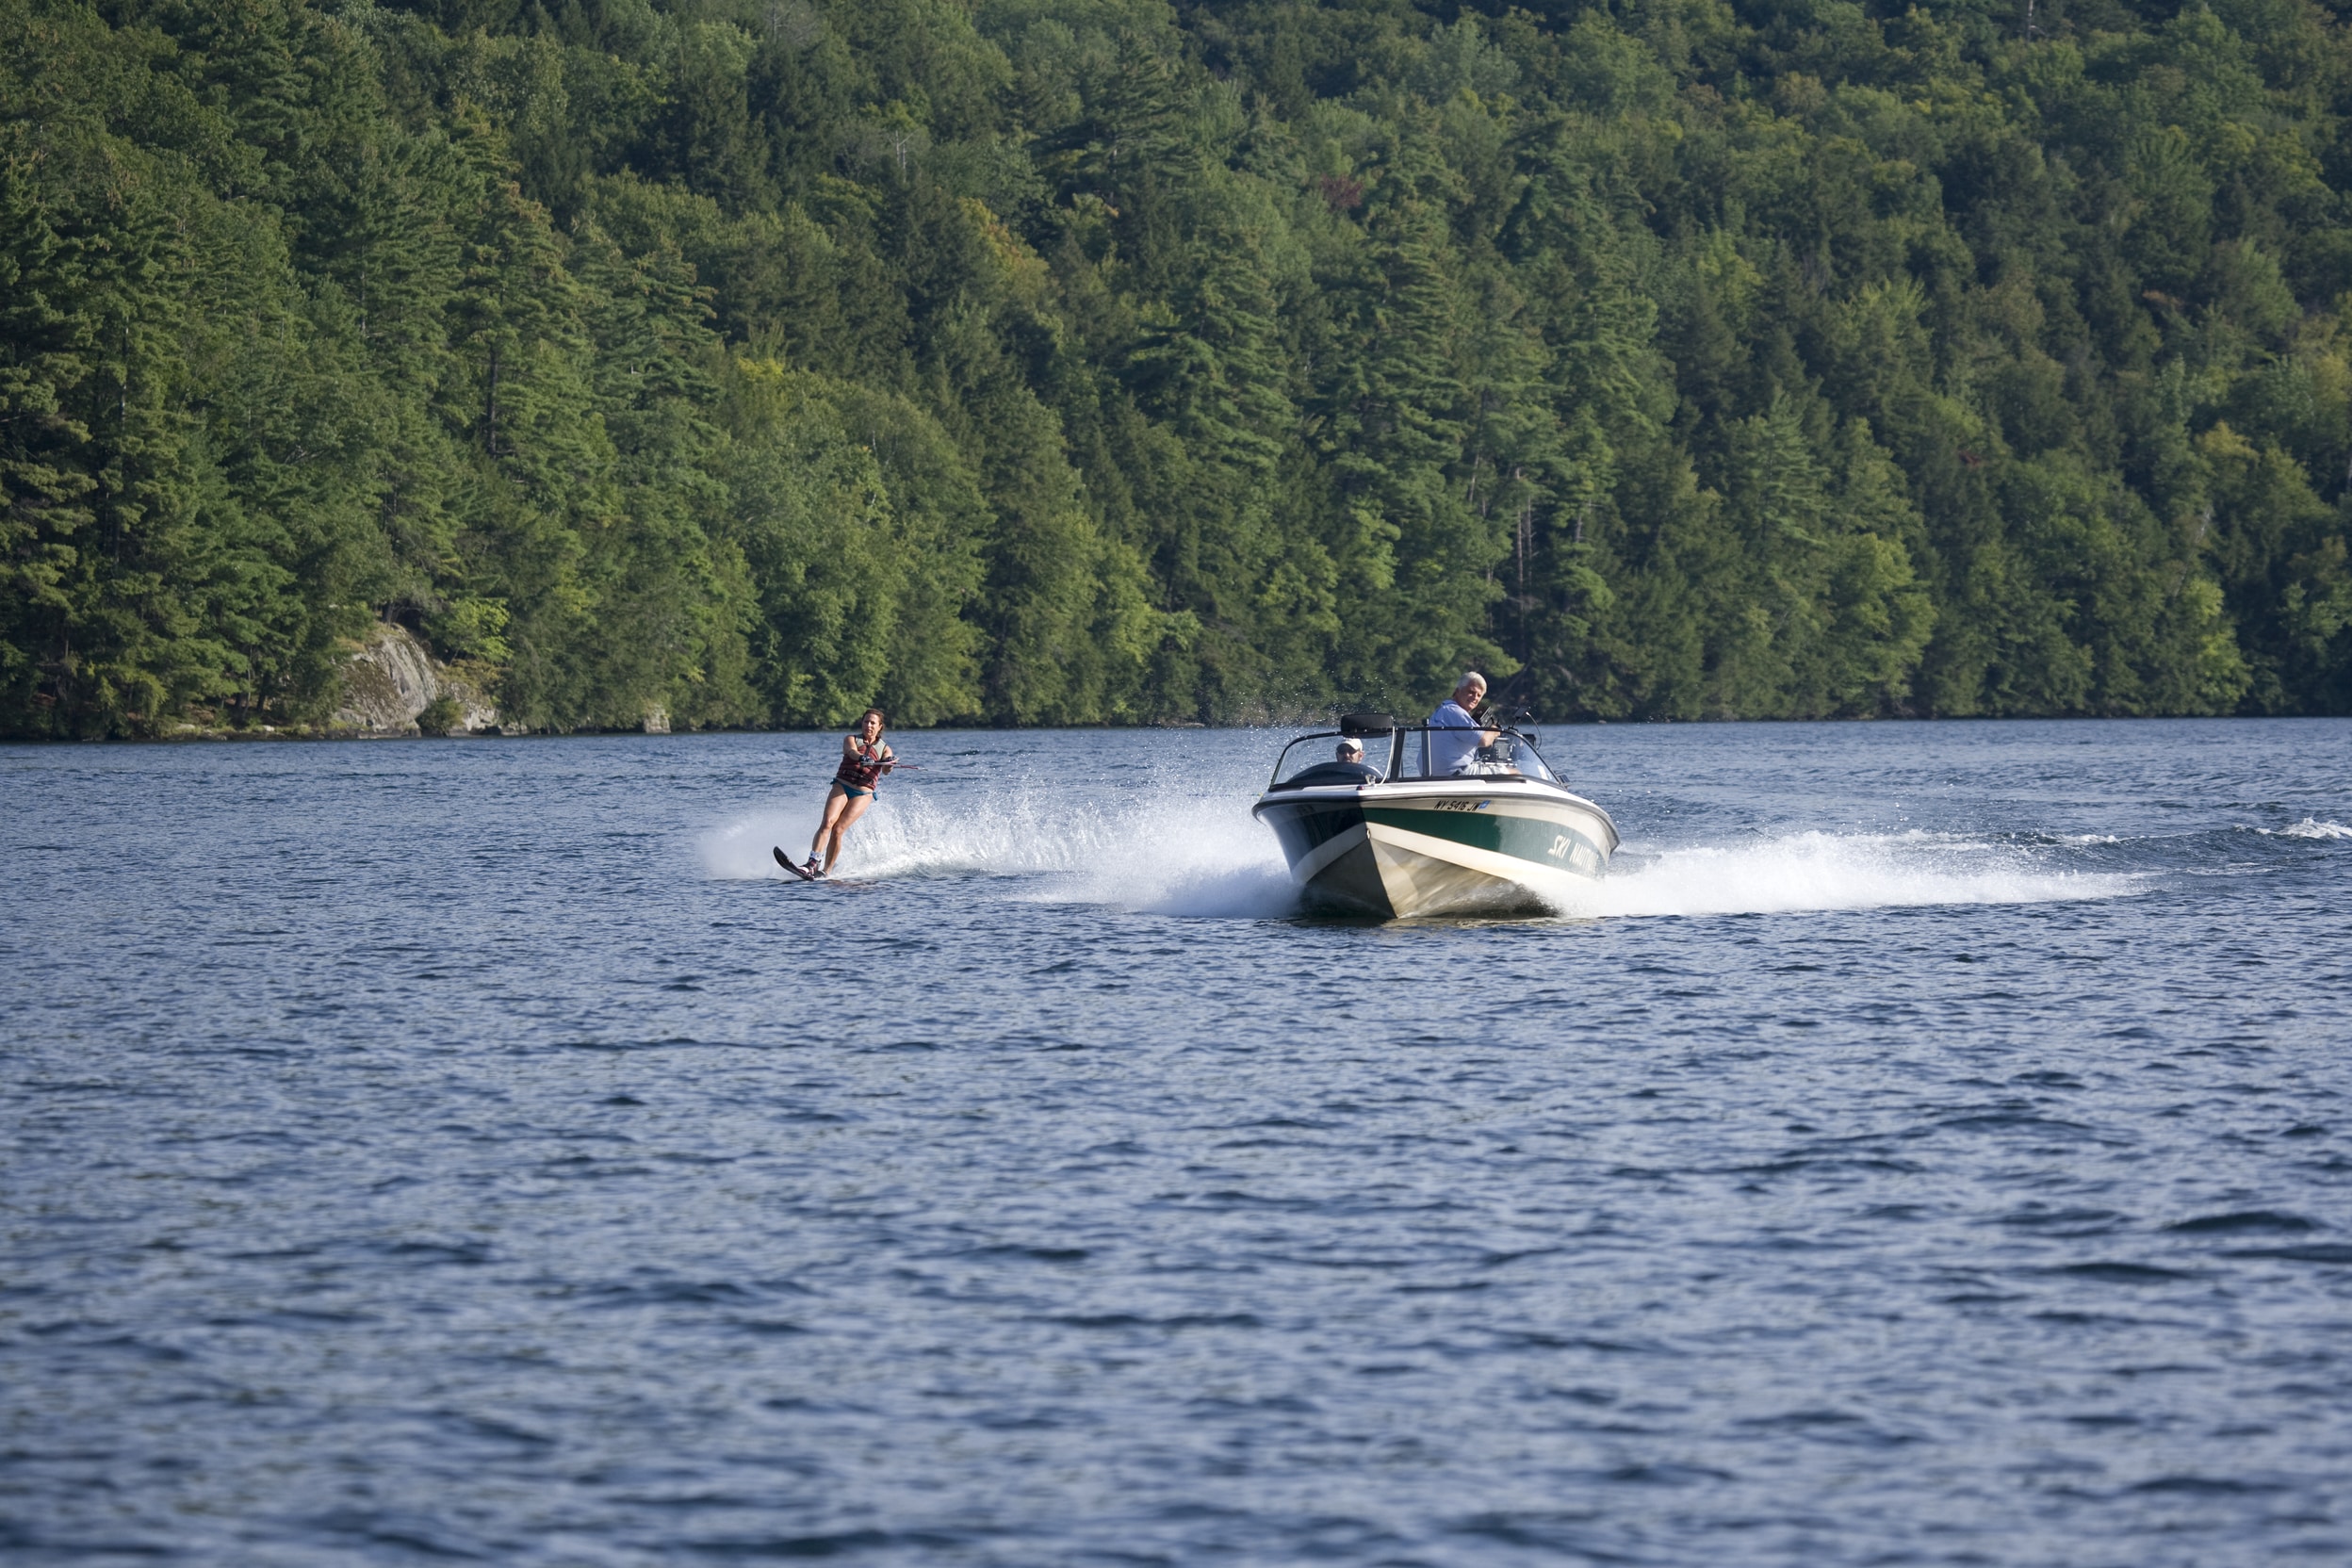 person water skiing on Indian Lake